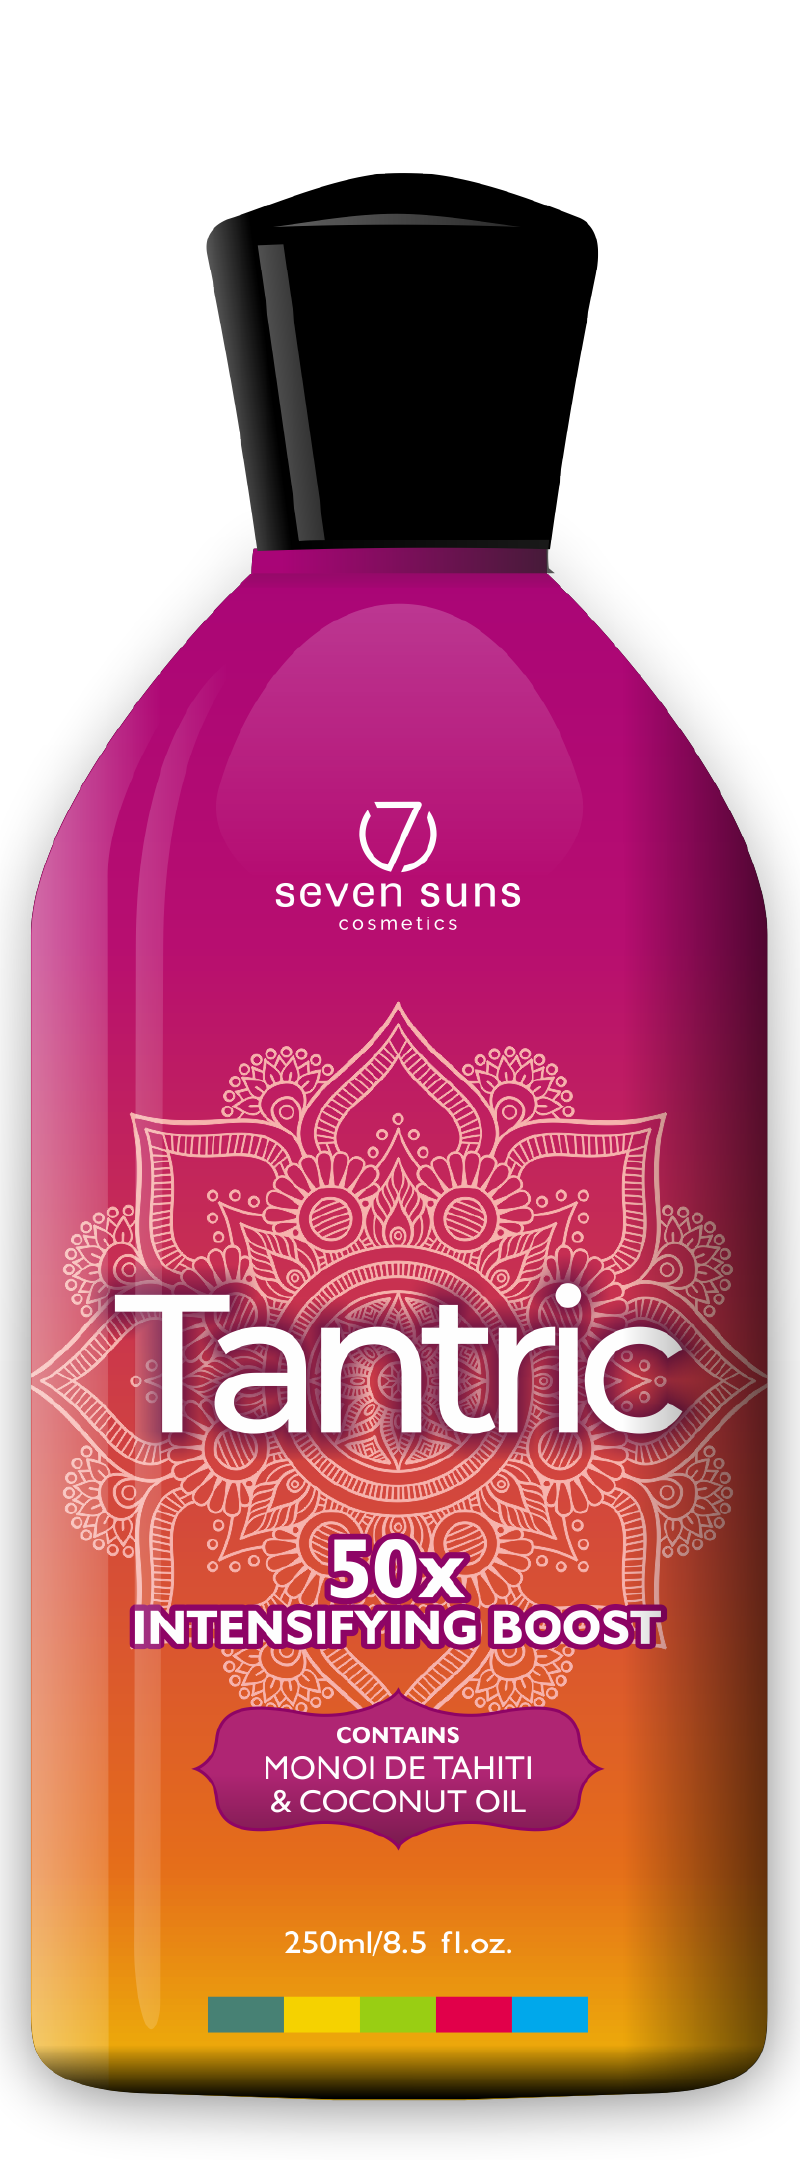 Tantric cosmetic bottle